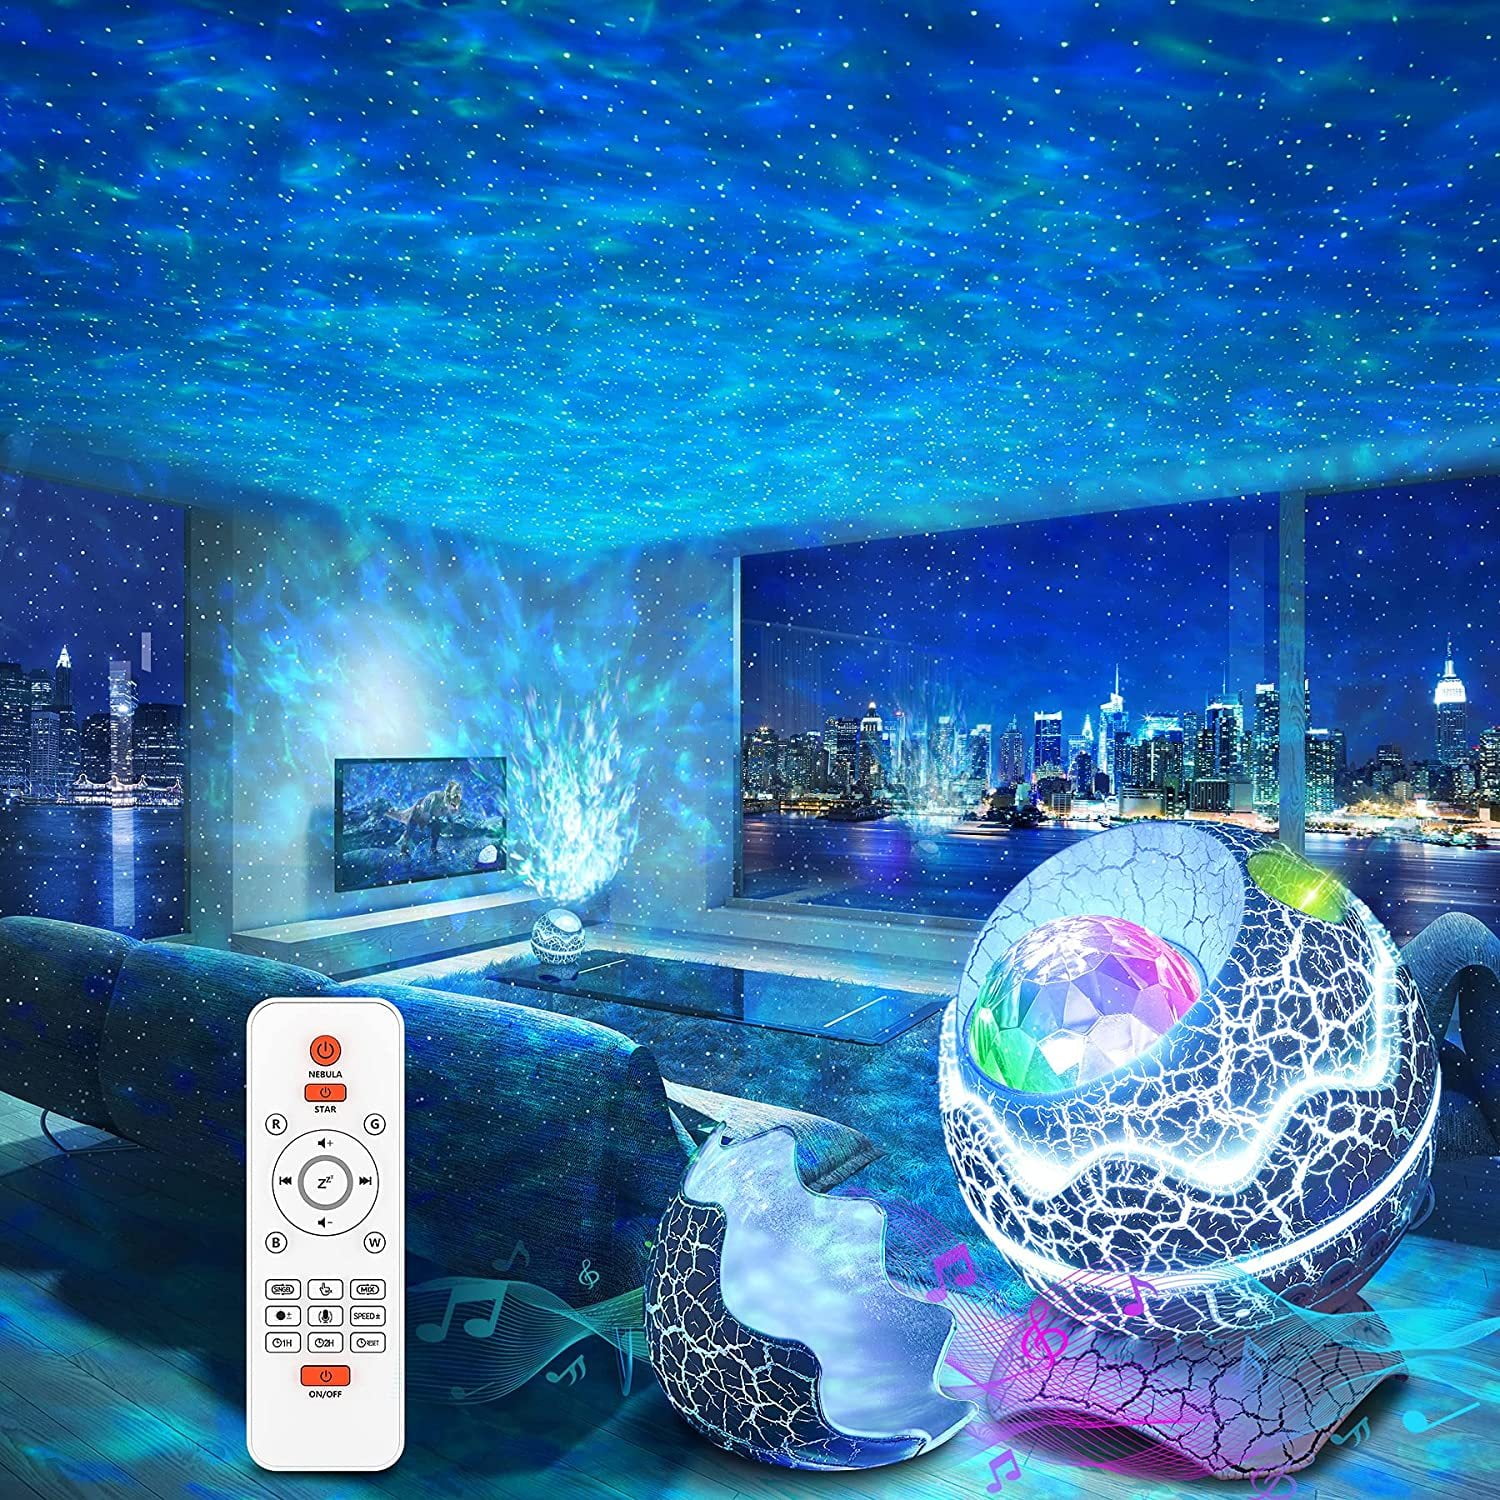 Recharge Remote Control 5 LED Night Light Bed Room Cupboard Lamp Decor 